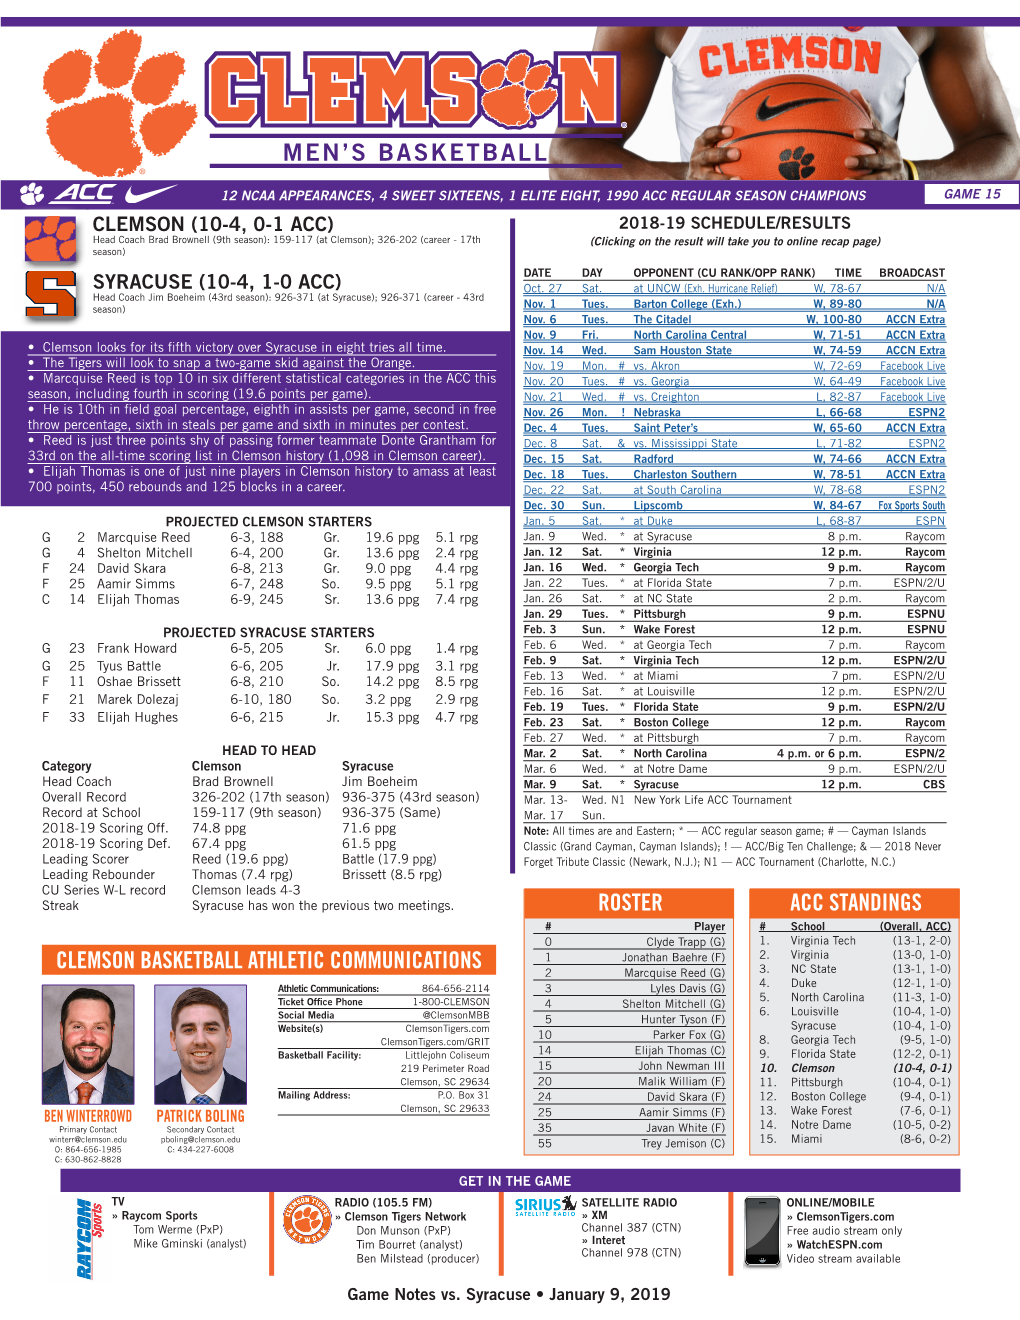 CLEMSON BASKETBALL ATHLETIC COMMUNICATIONS 2 Marcquise Reed (G) 3